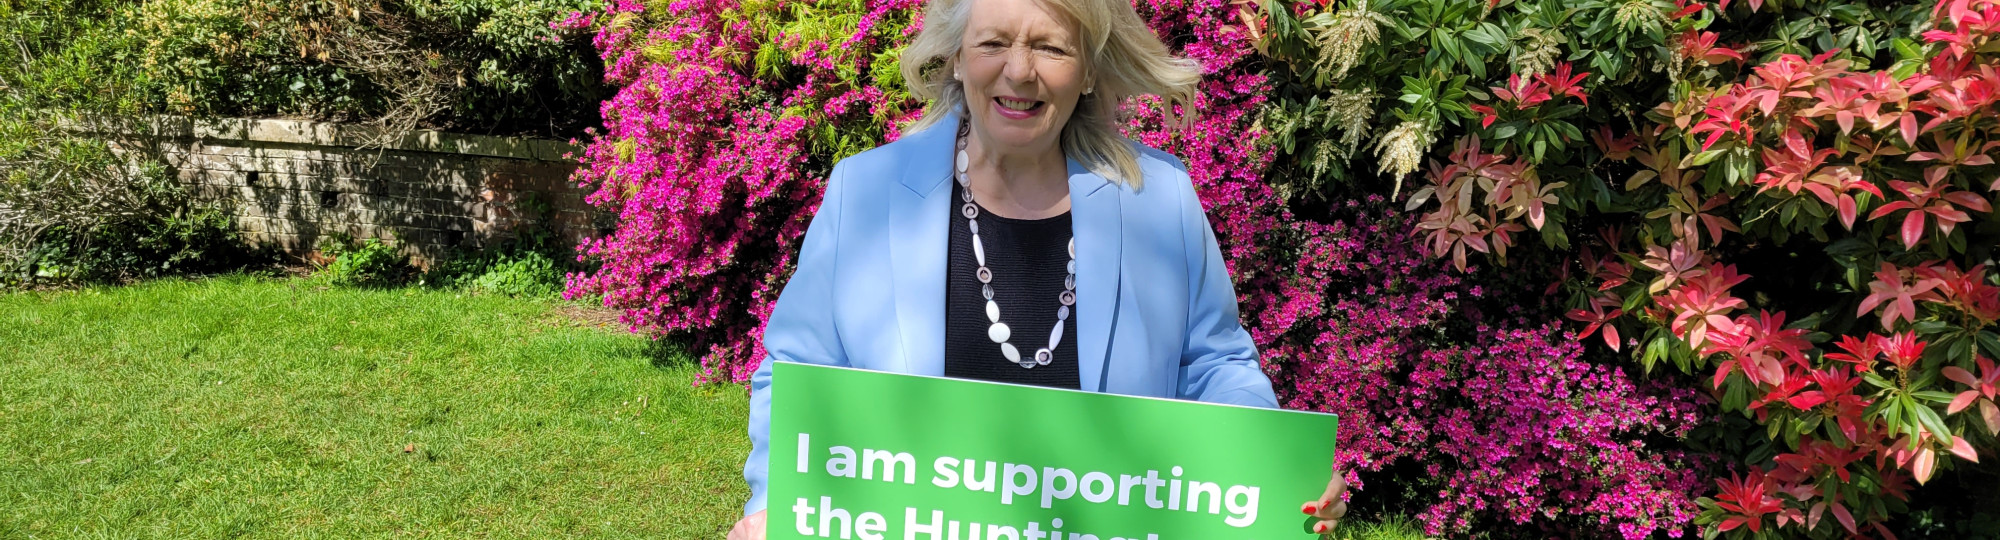 Alison Steadman holding up I am supporting the Huntington's disease community sign